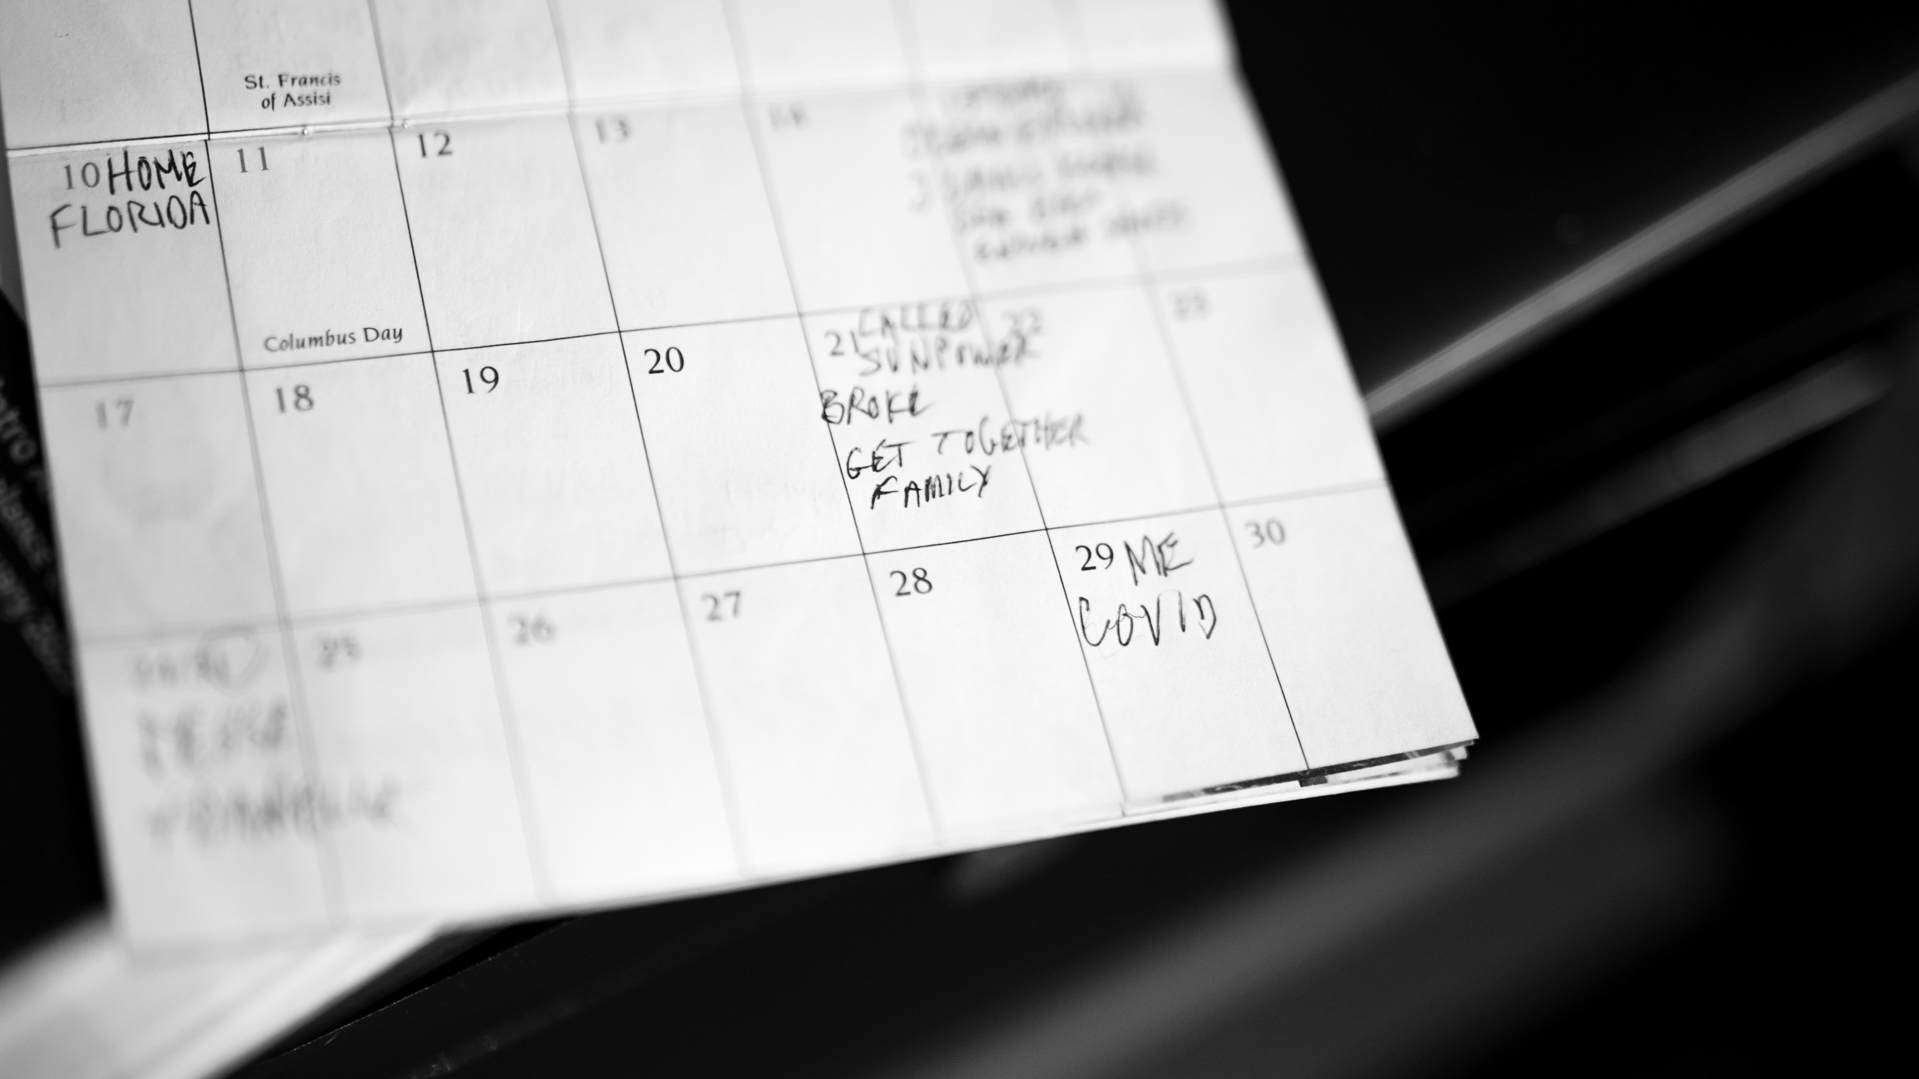 A calendar that shows when a family get together happened and when they got Covid